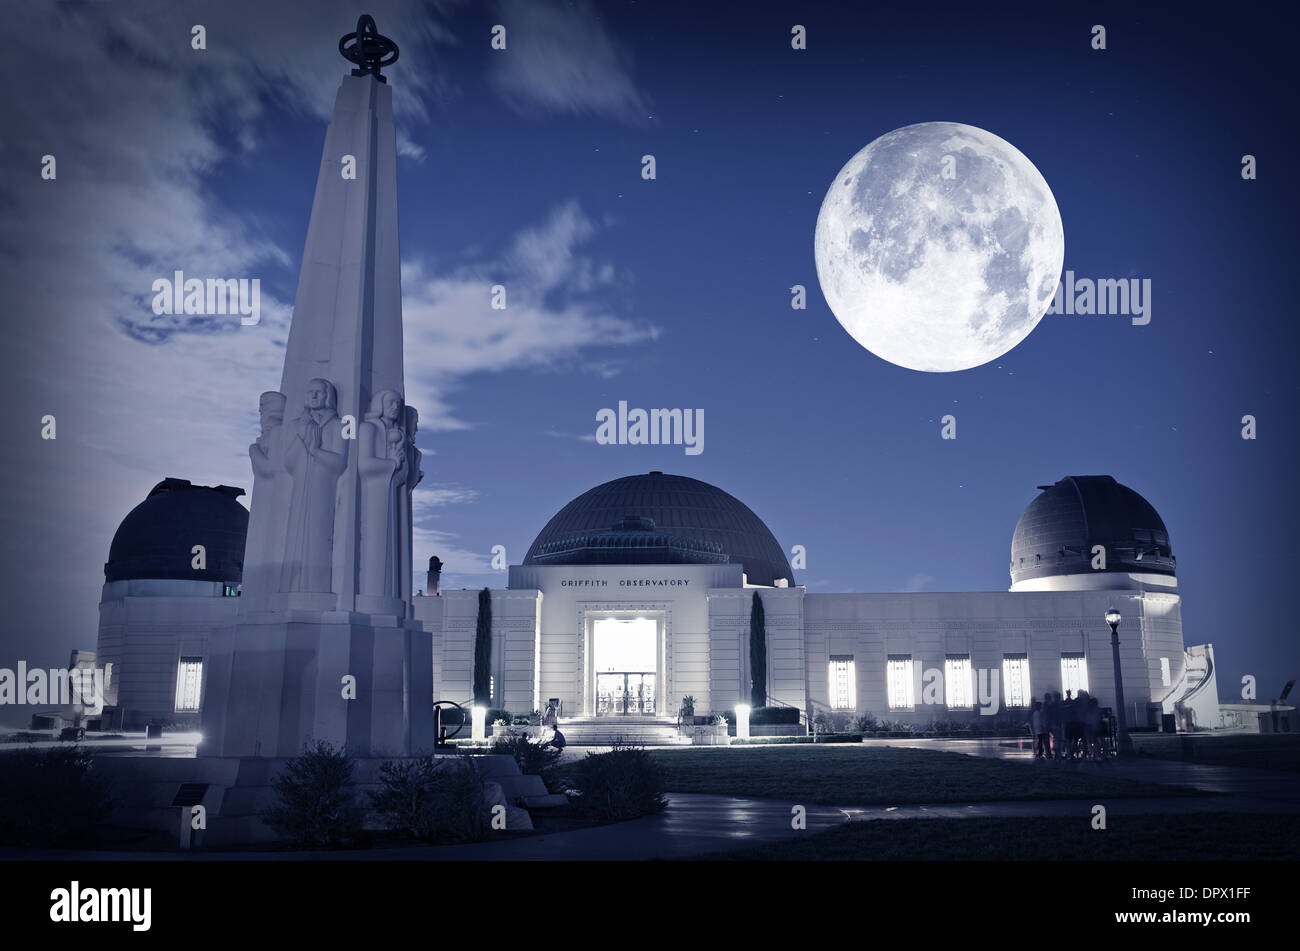 Famous Los Angeles Observatory - Griffith Observatory. Science Photography Collection. Griffith Observatory Los Angeles, Califor Stock Photo